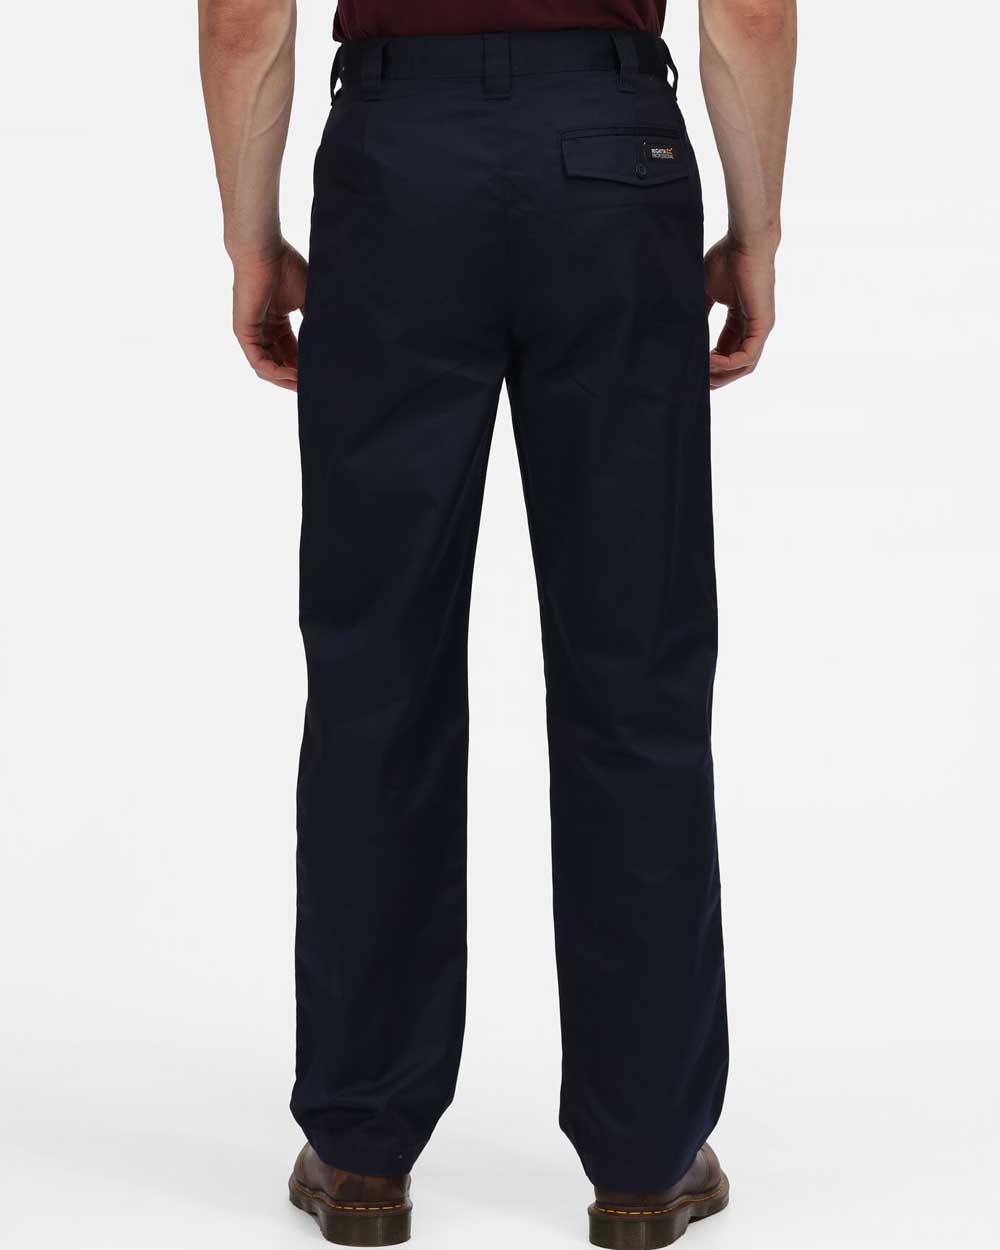 Men's Country Trousers & Shooting Trousers | Alan Paine UK – Alan Paine  Sweden